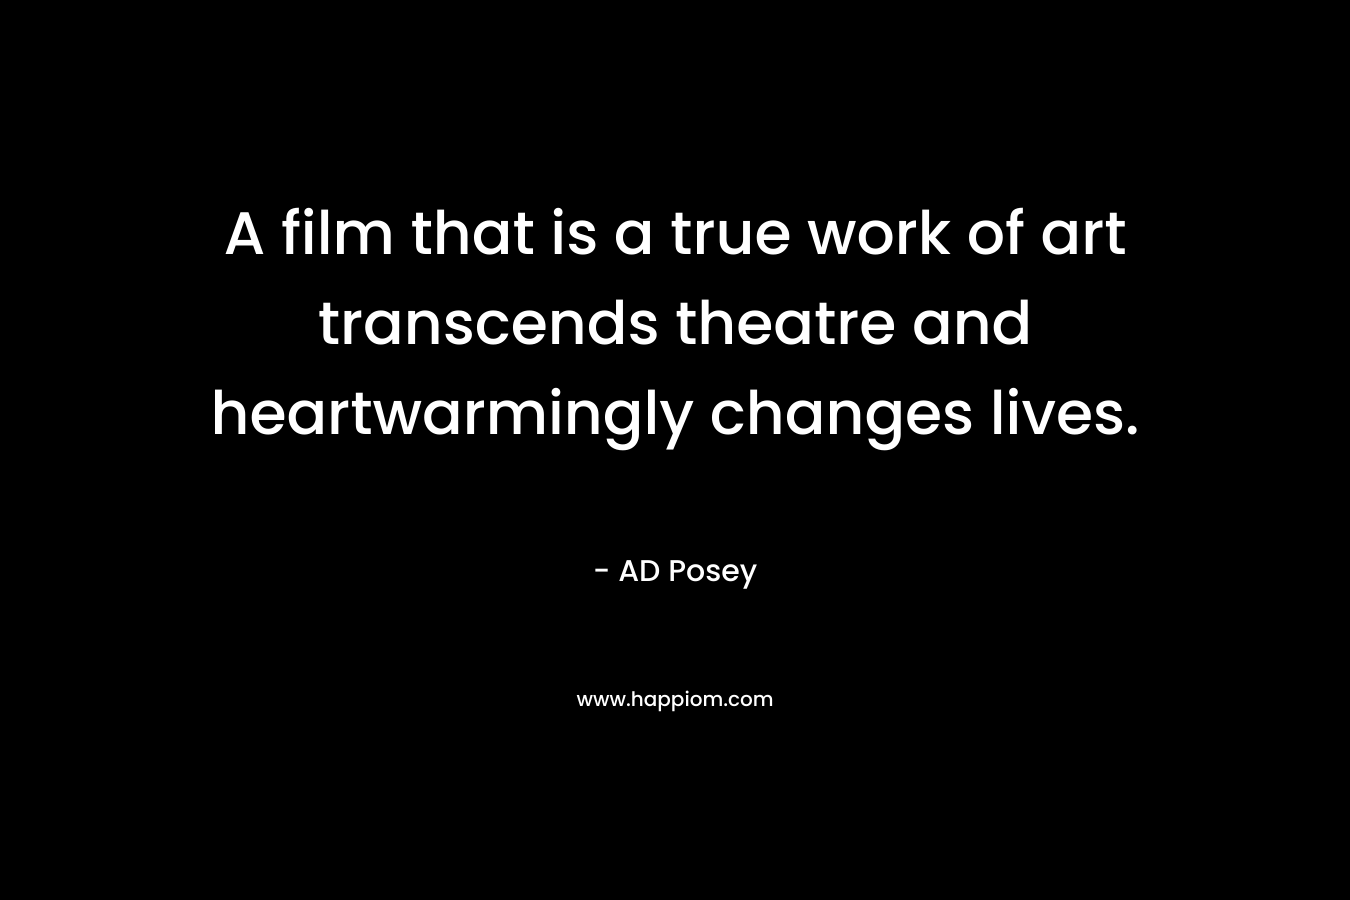 A film that is a true work of art transcends theatre and heartwarmingly changes lives. – AD Posey